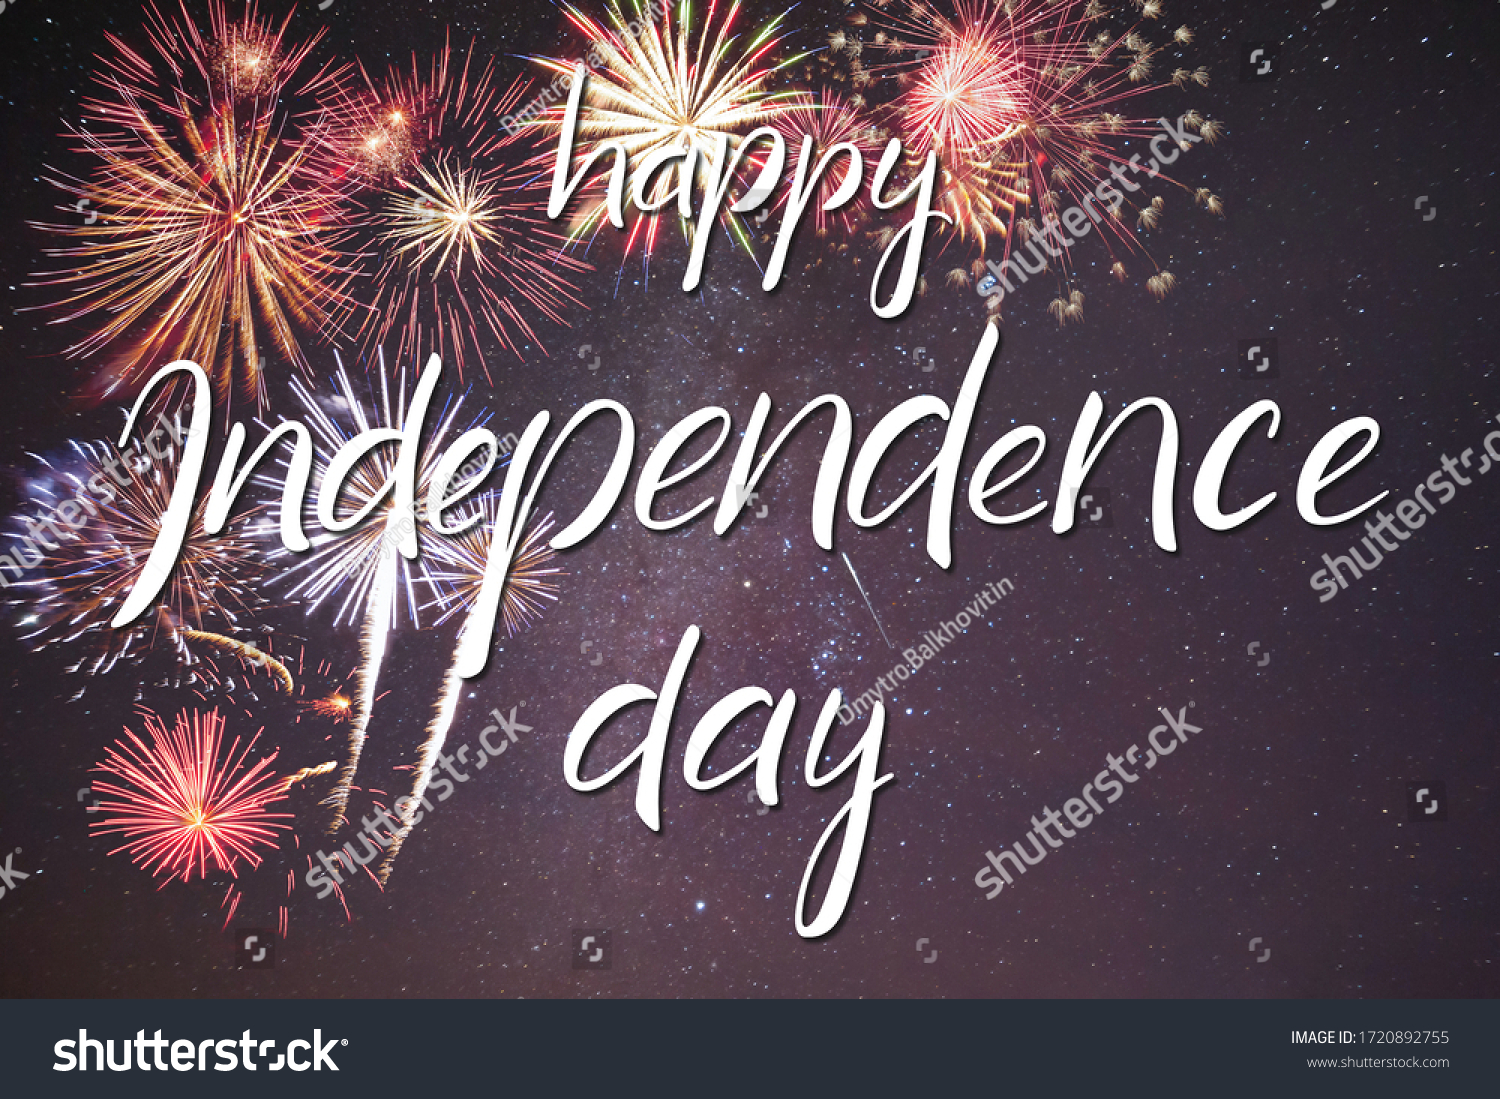 Holiday night sky with fireworks and hand lettering text Happy Independence Day #1720892755